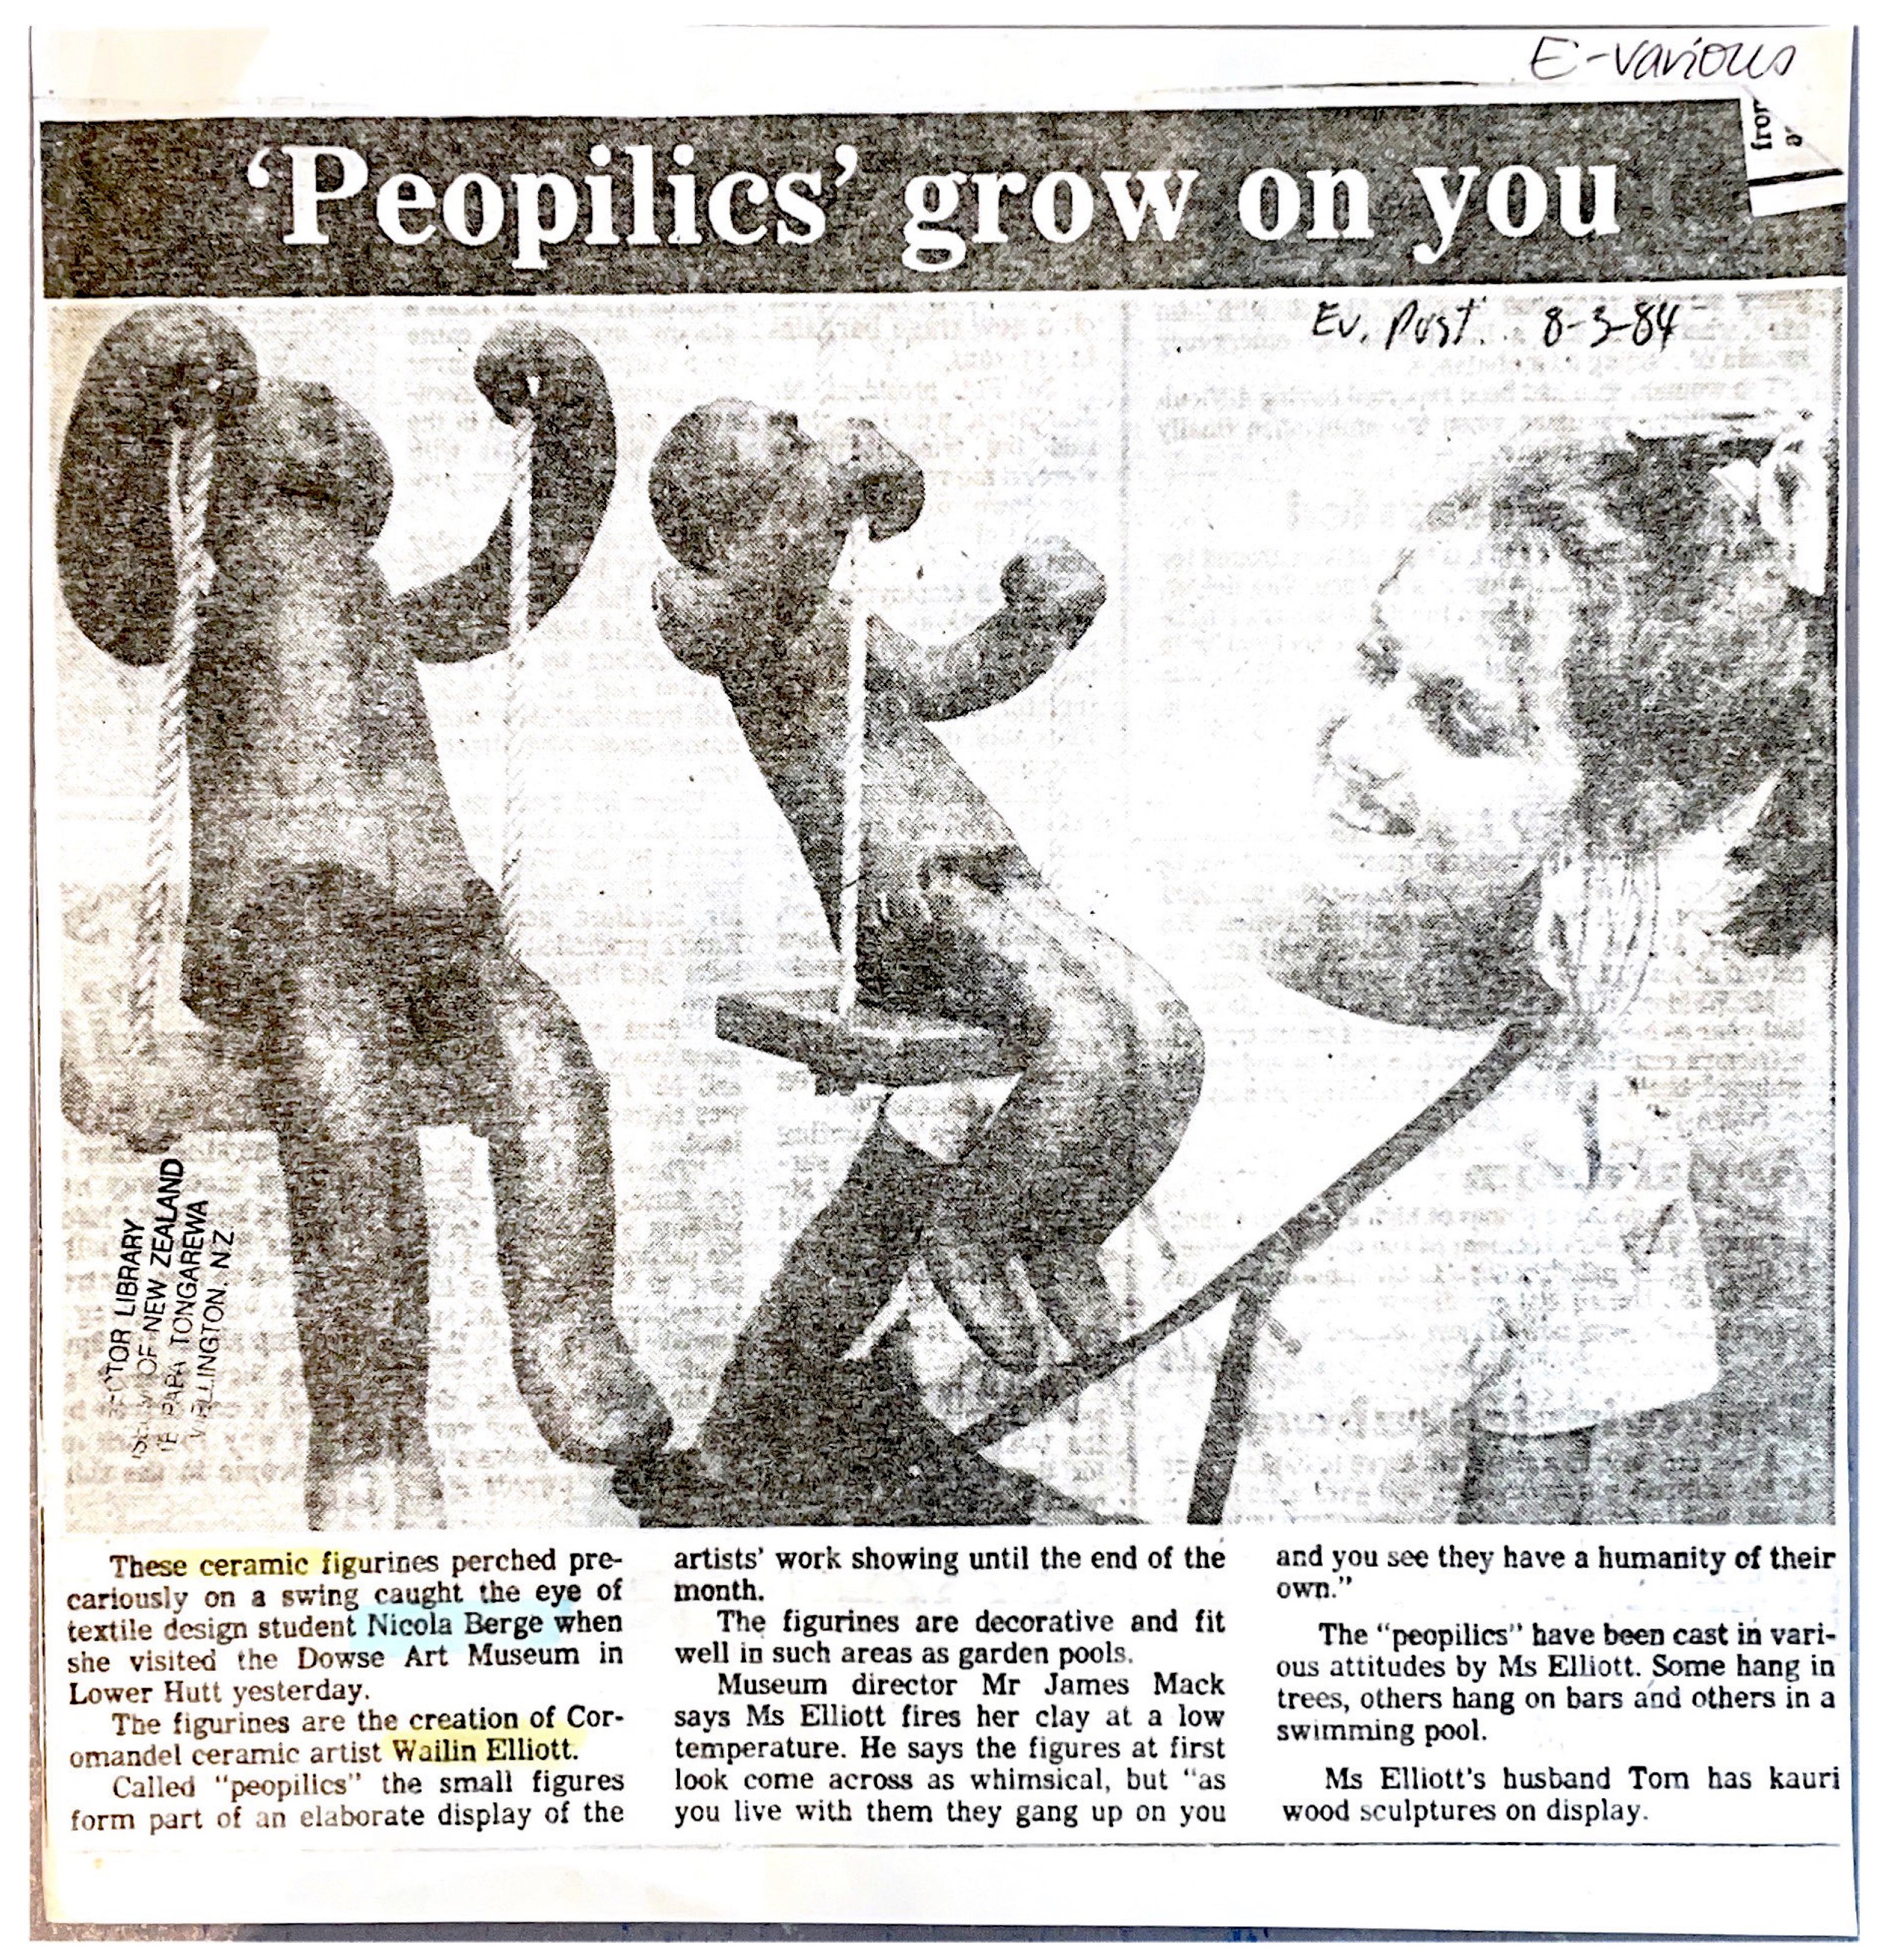 Newspaper clipping with a photo of a woman looking at two clay sculptures perched on swings.